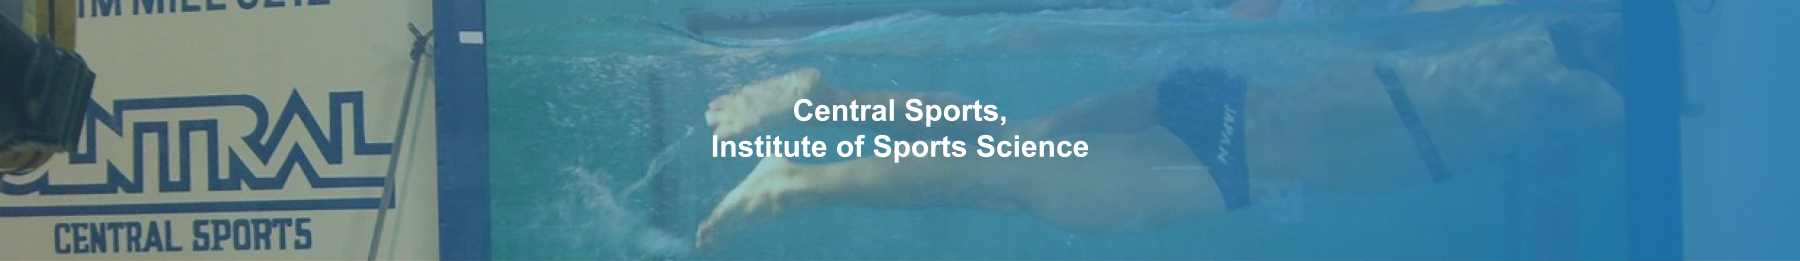 Central Sports, Institute of Sports Science